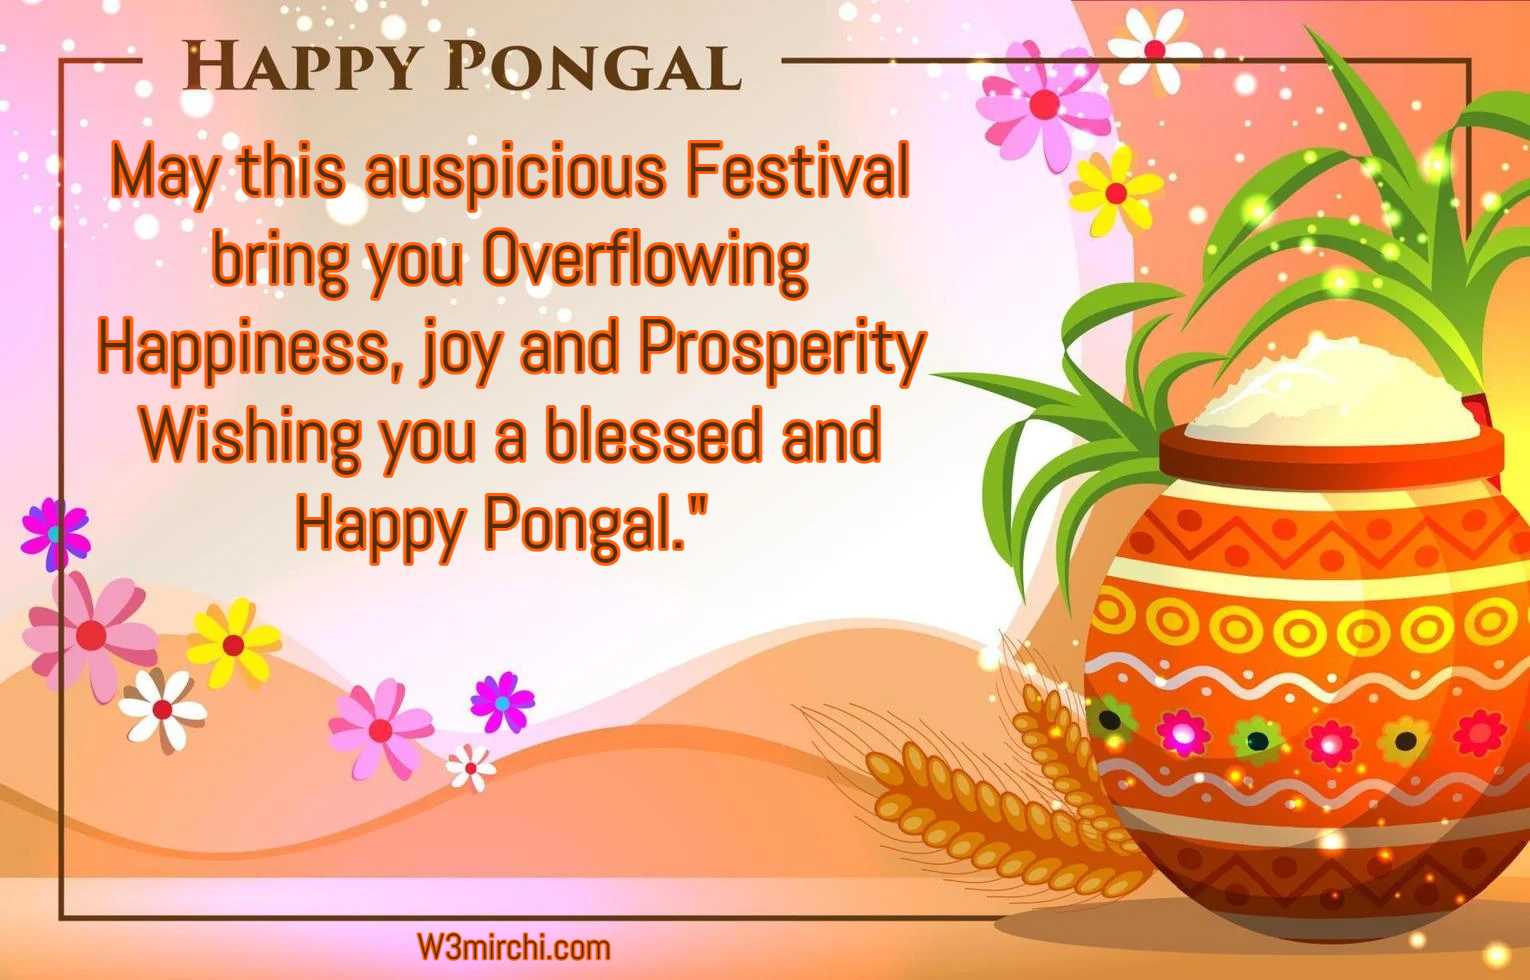 Wish you a very Happy Pongal” - Pongal Wishes And Quotes